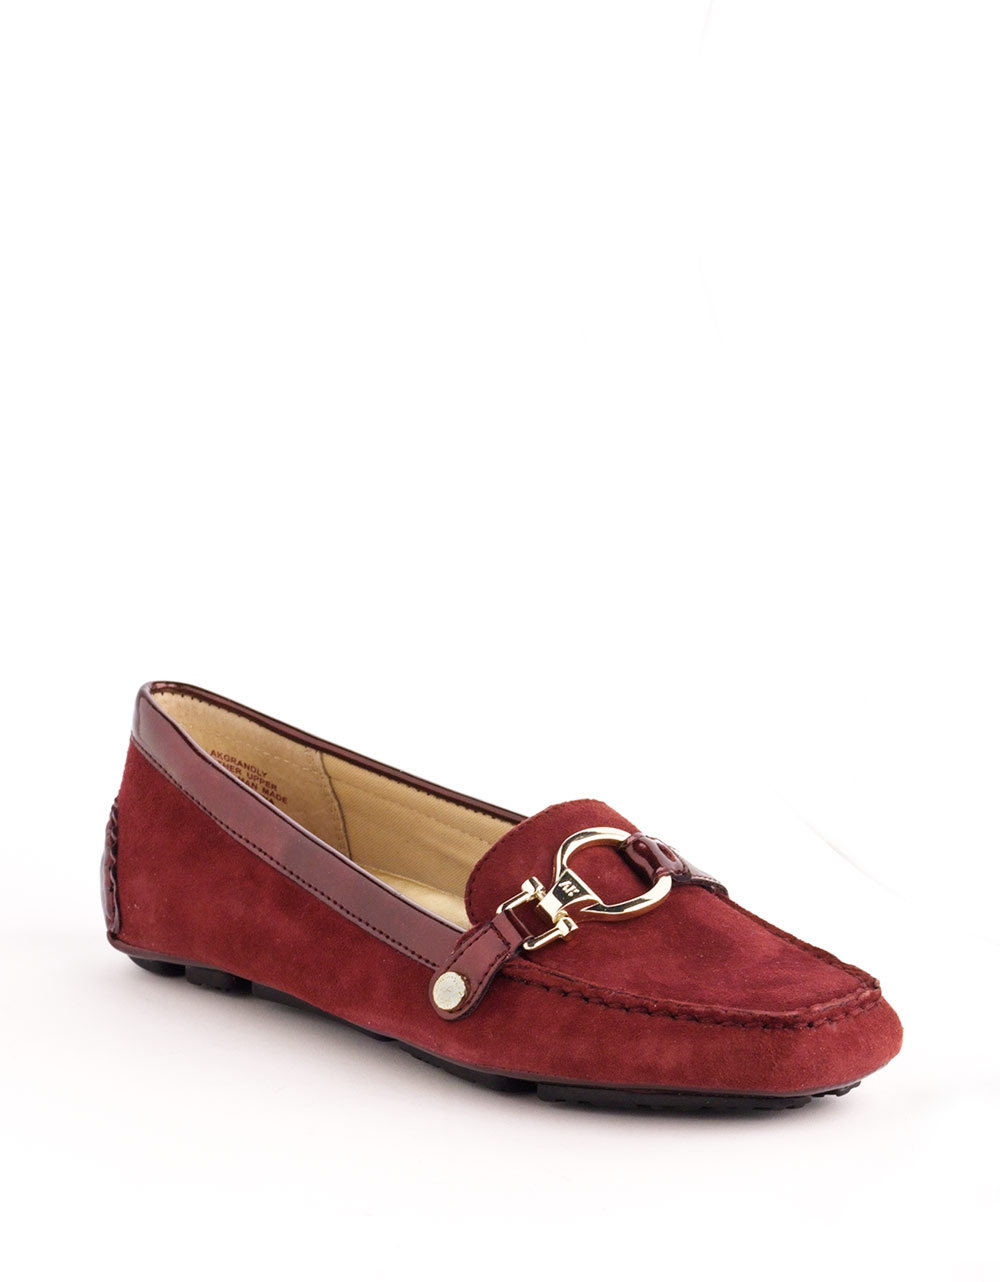 Lyst - Anne Klein Grandly Loafers in Red